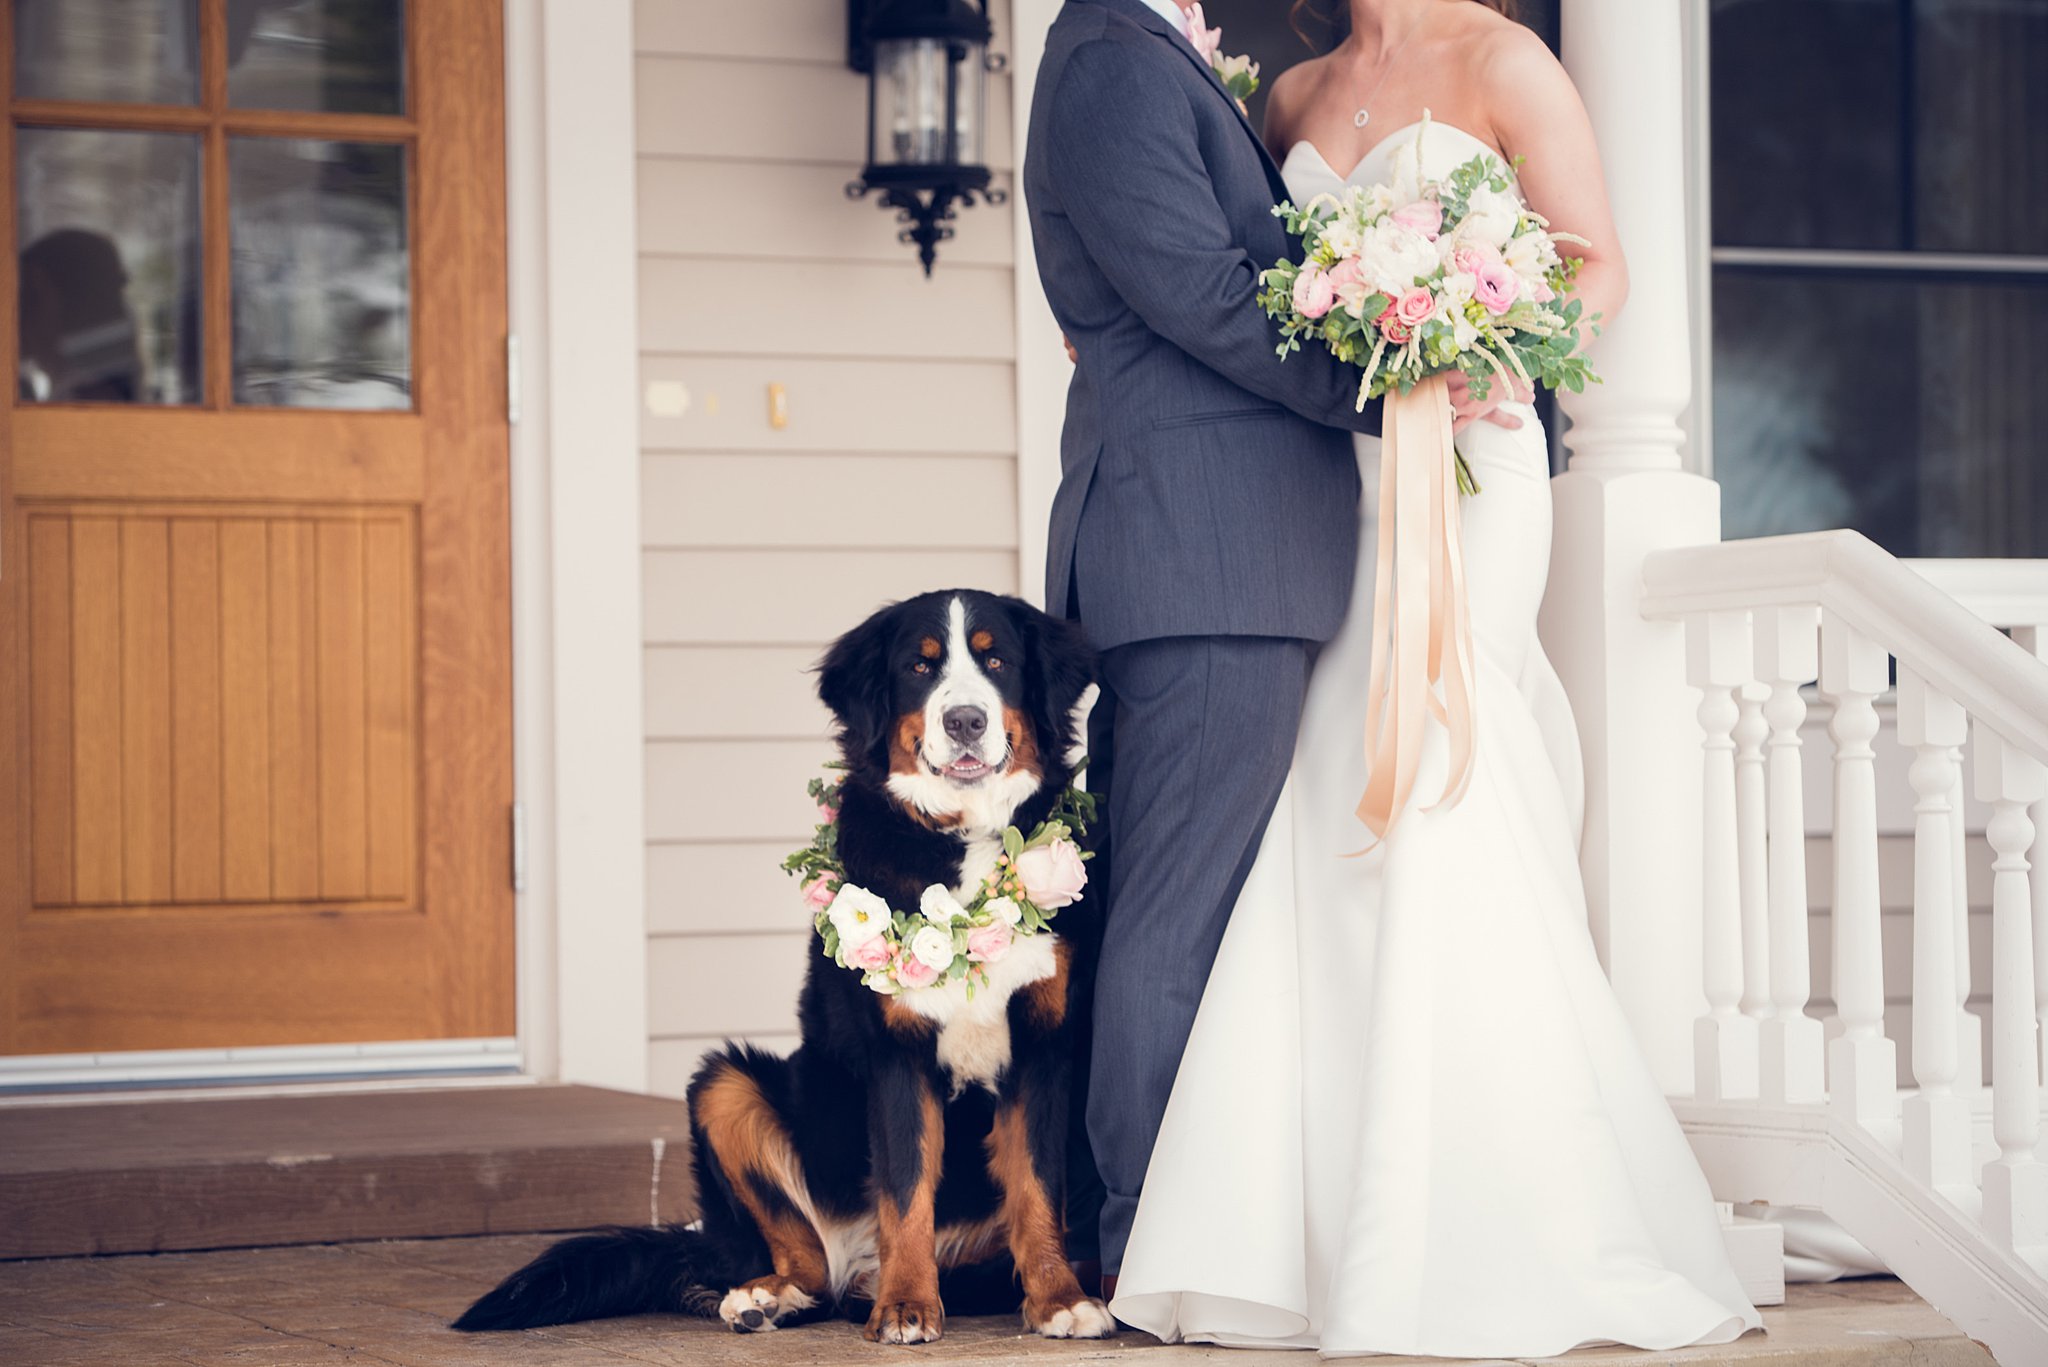 A multi color dog sits with the newlyweds on a porch at one of the small wedding venues in colorado springs